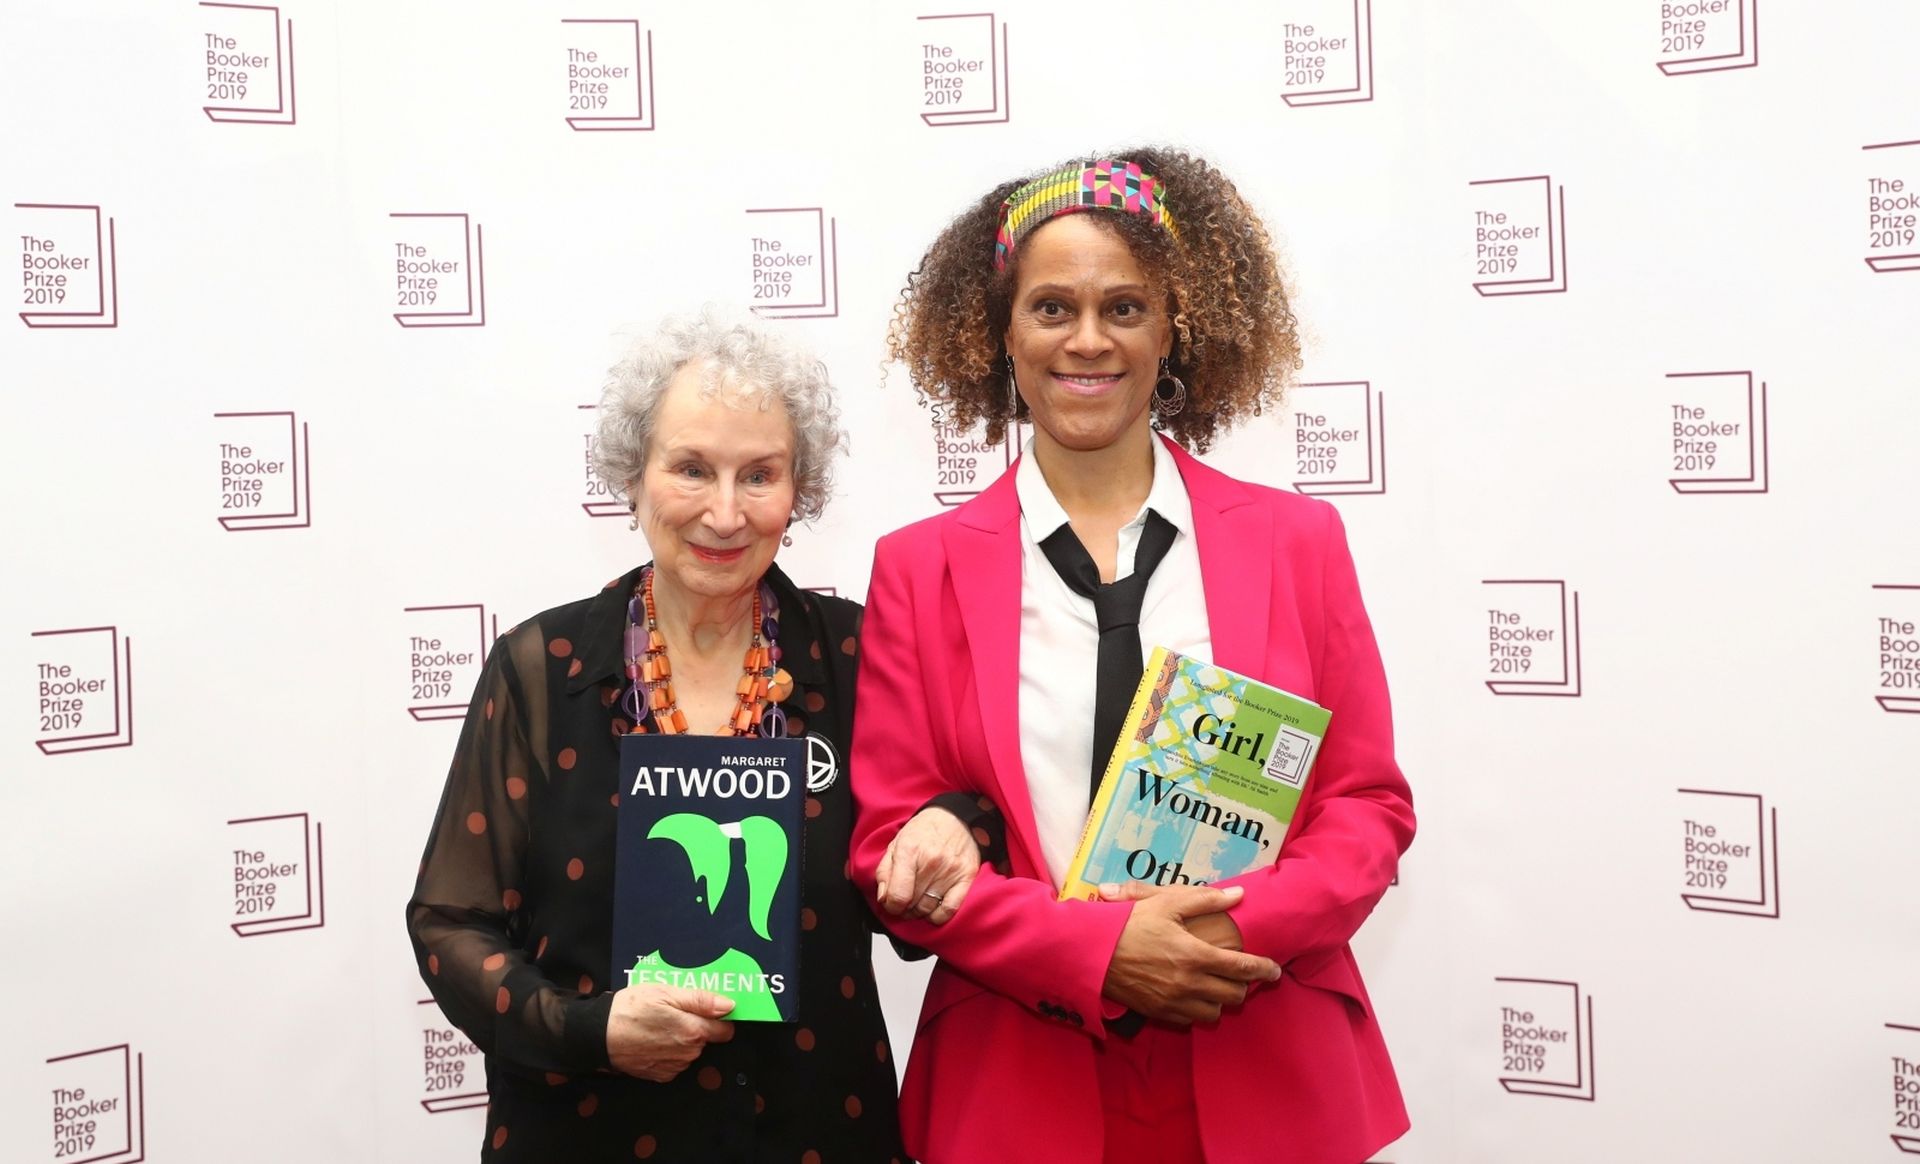 Margaret Atwood poses with Bernardine Evaristo after jointly winning the Booker Prize for Fiction 2019 at the Guildhall in London Margaret Atwood poses with Bernardine Evaristo after jointly winning the Booker Prize for Fiction 2019 at the Guildhall in London, Britain October 14, 2019. REUTERS/Simon Dawson SIMON DAWSON